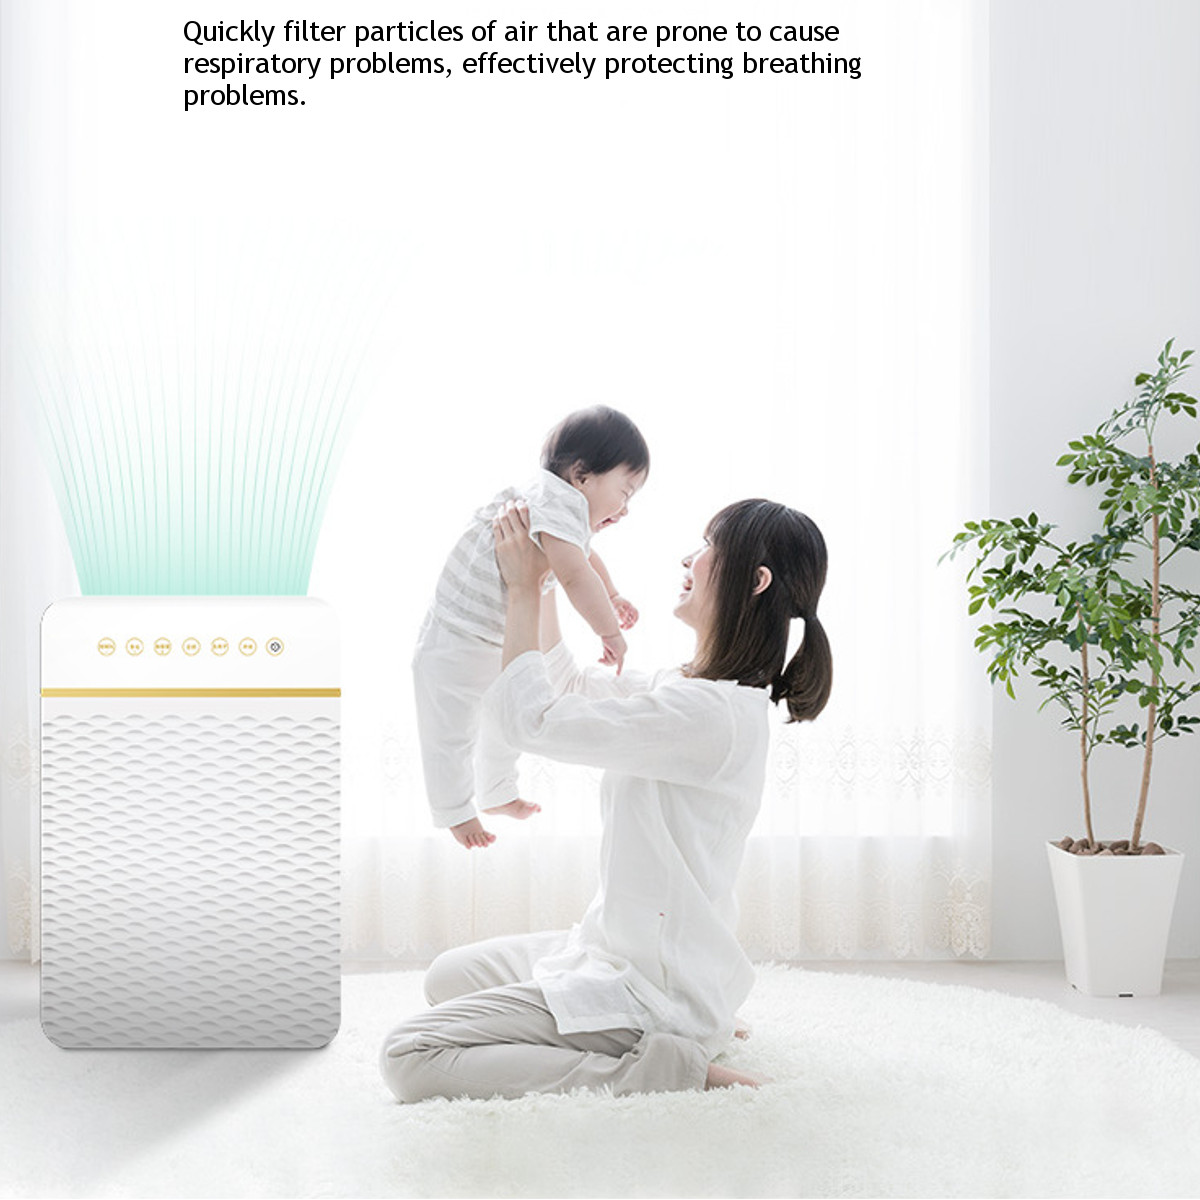 Air-Purifier-650msup3H-HEPA-Filter-Home-Germ-Smoke-Dust-Cleaner-w-Remote-Control-Air-Filter-Air-Clea-1631975-4